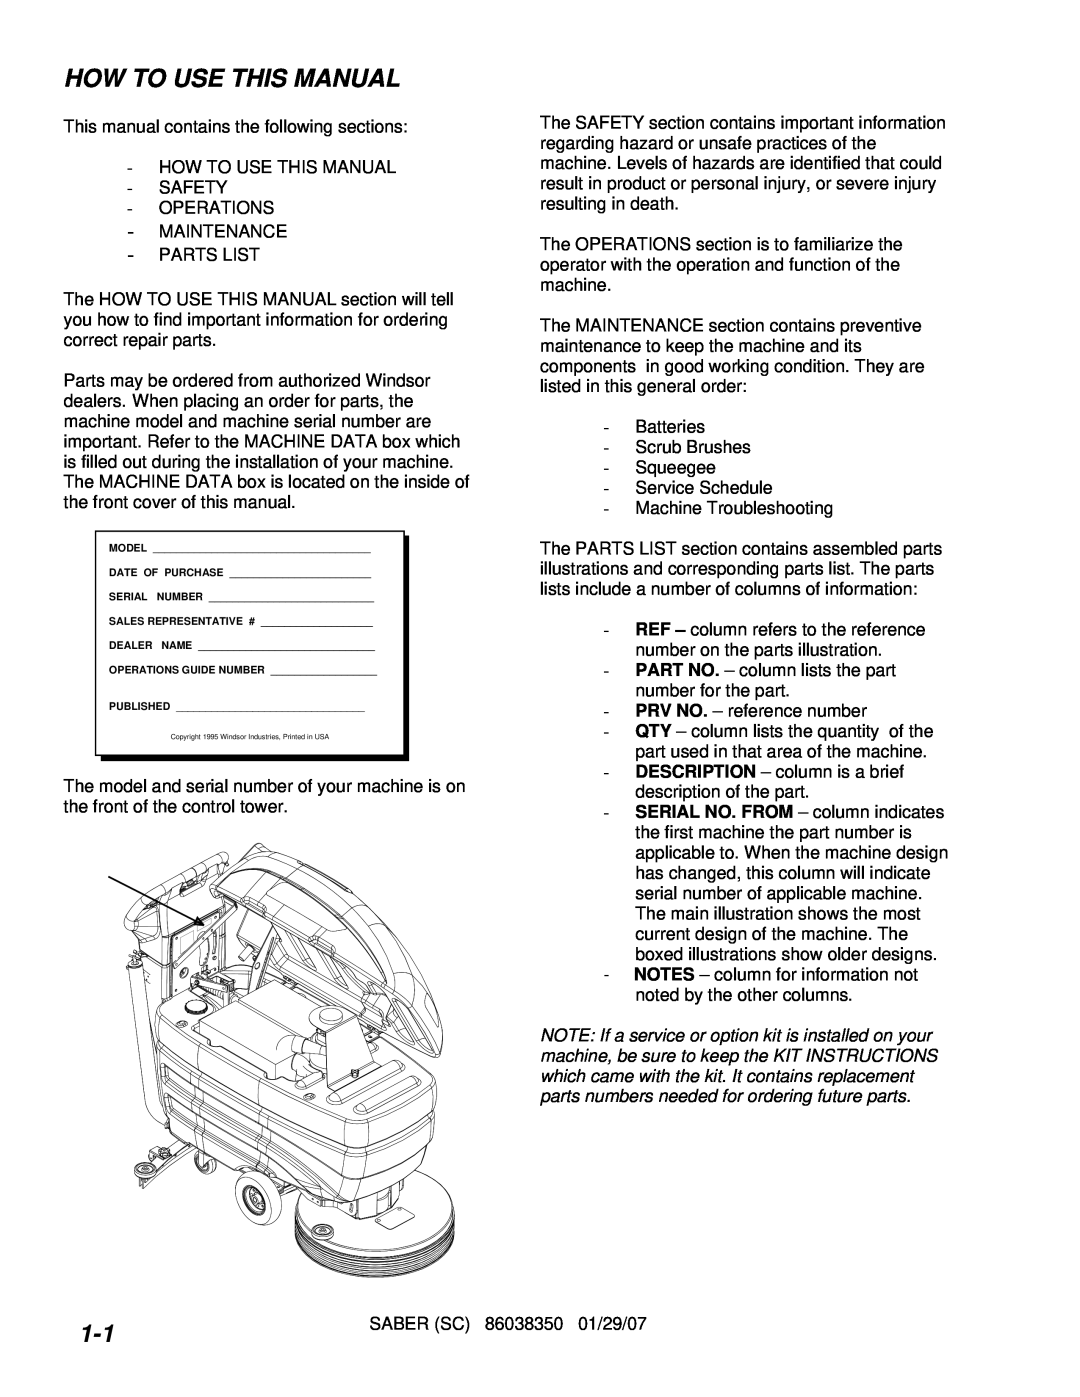 Windsor SCX20T, SCXC20T, SC20T, SCC20T operating instructions How To Use This Manual 